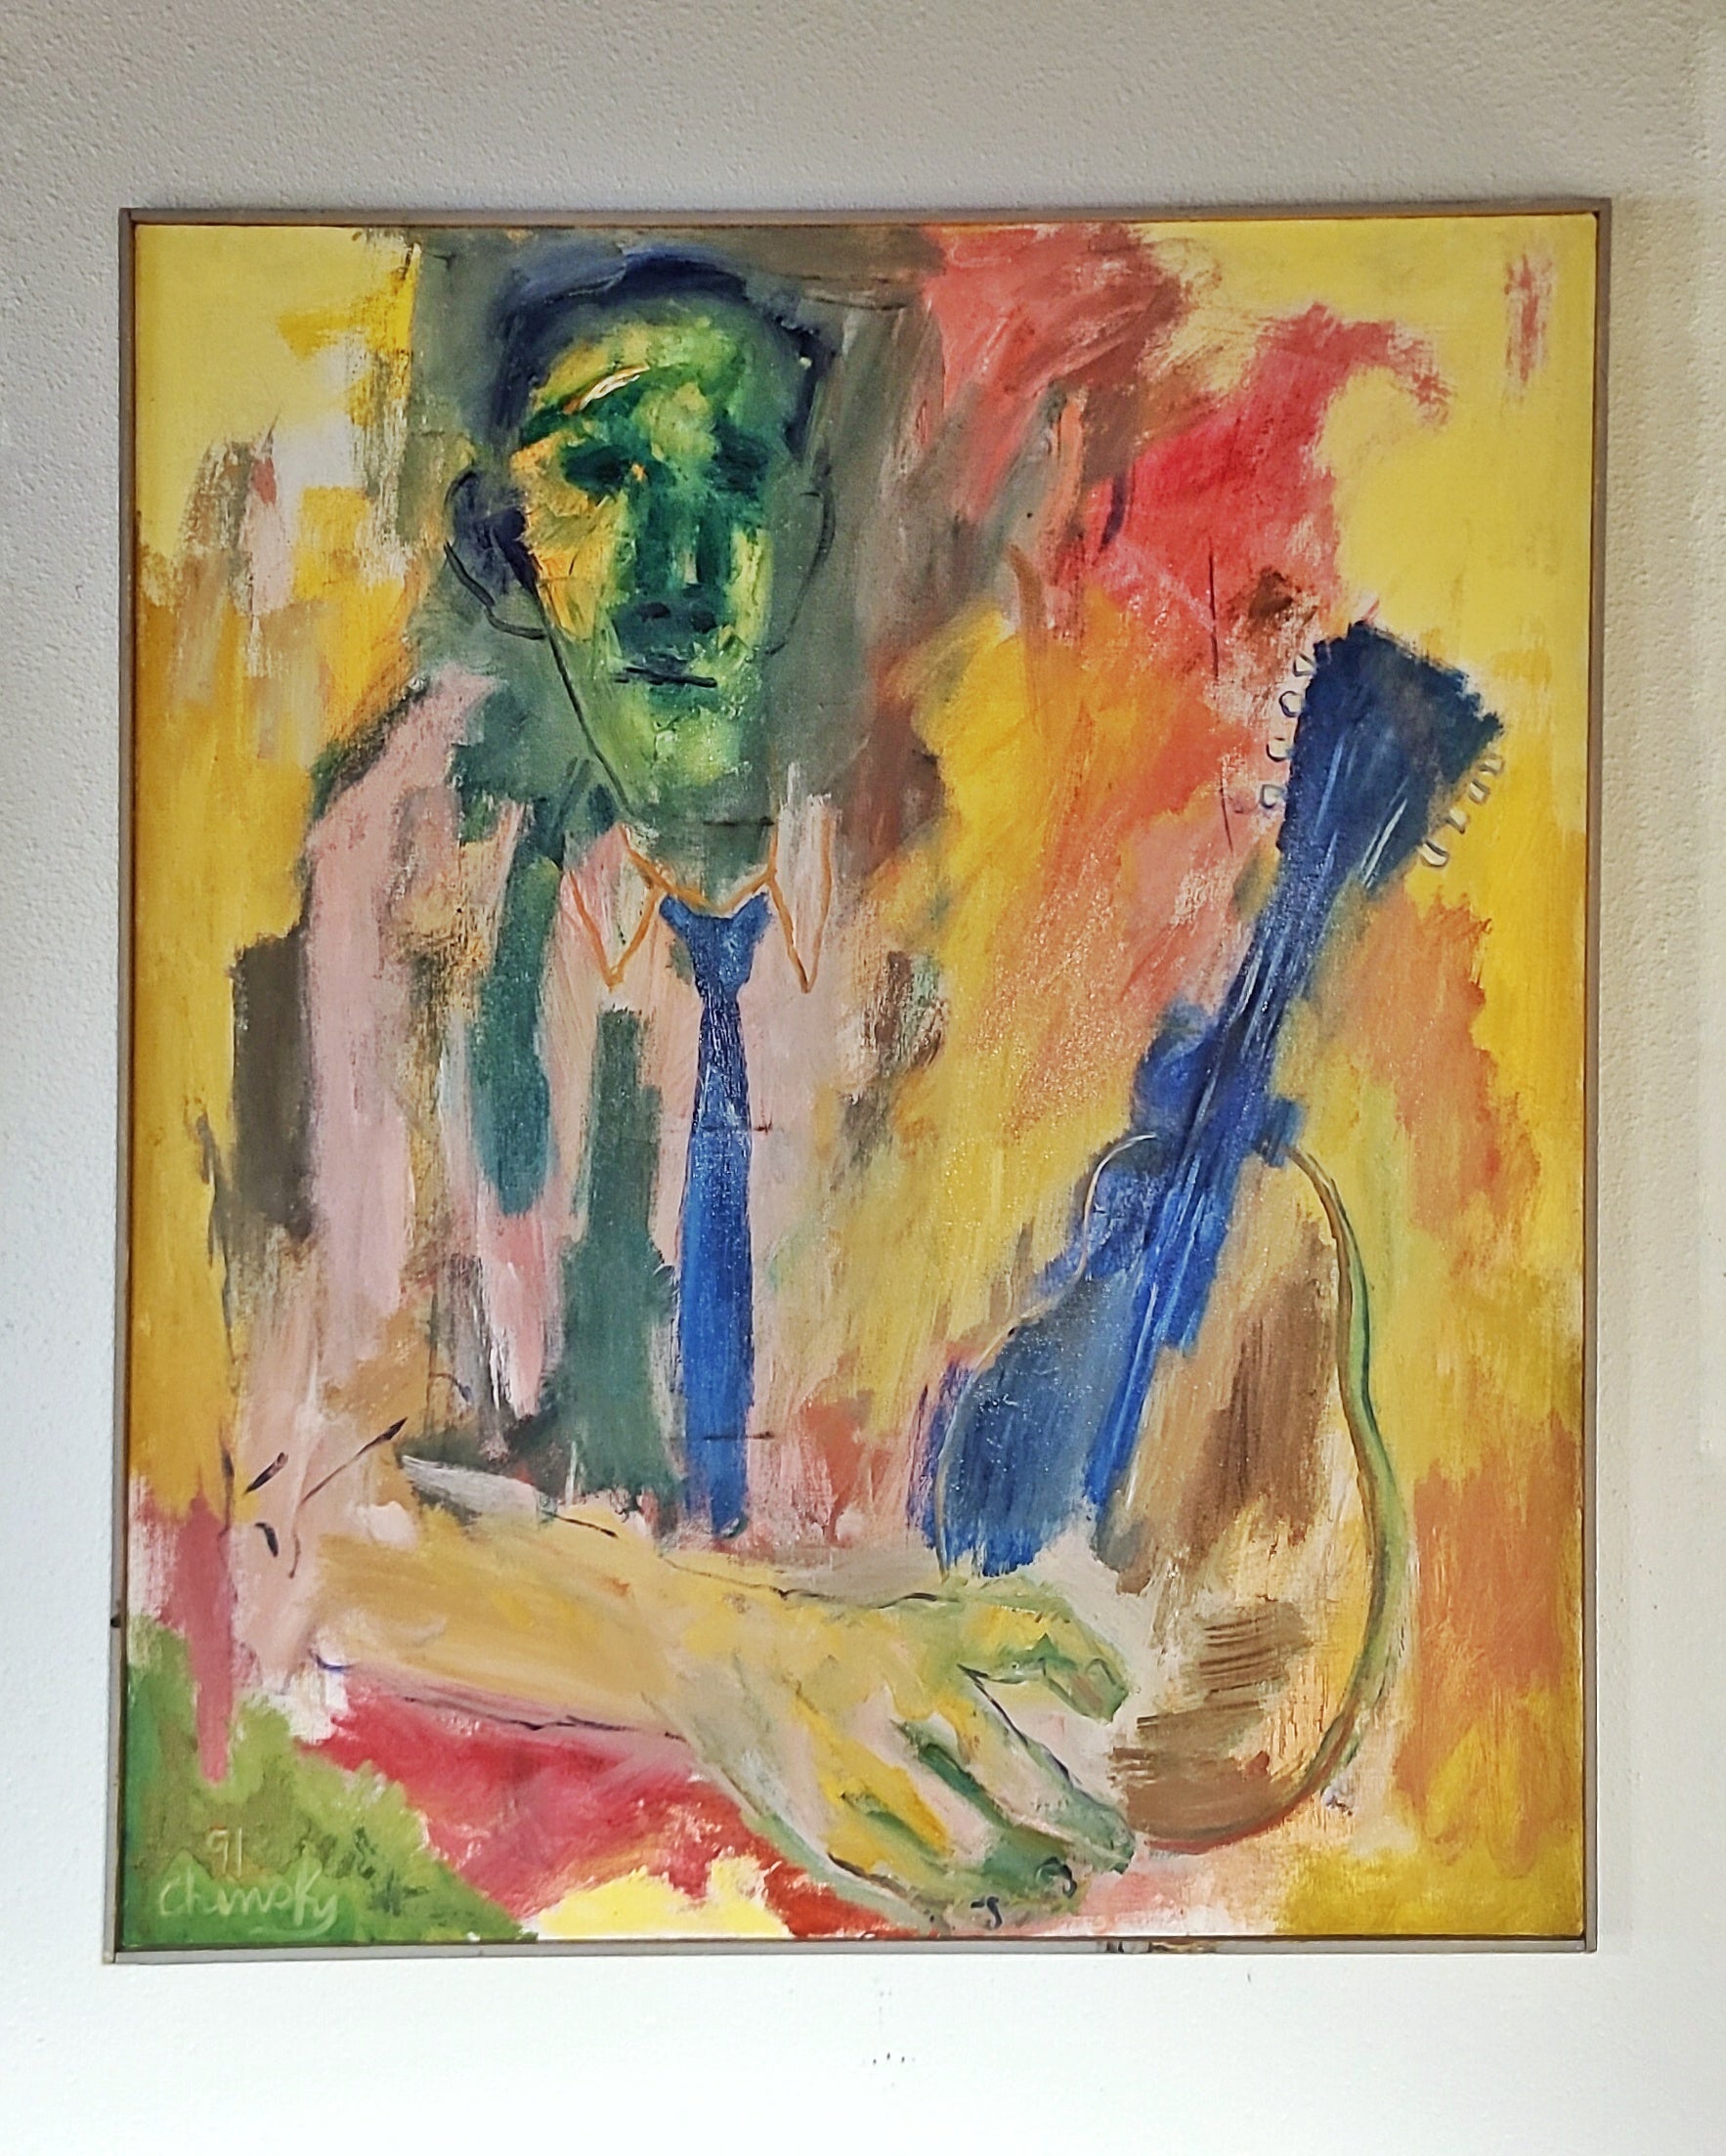 'SELF-TAUGHT MUSICIAN' OIL ON CANVAS BY SHERMAN CHINSKY (1991)